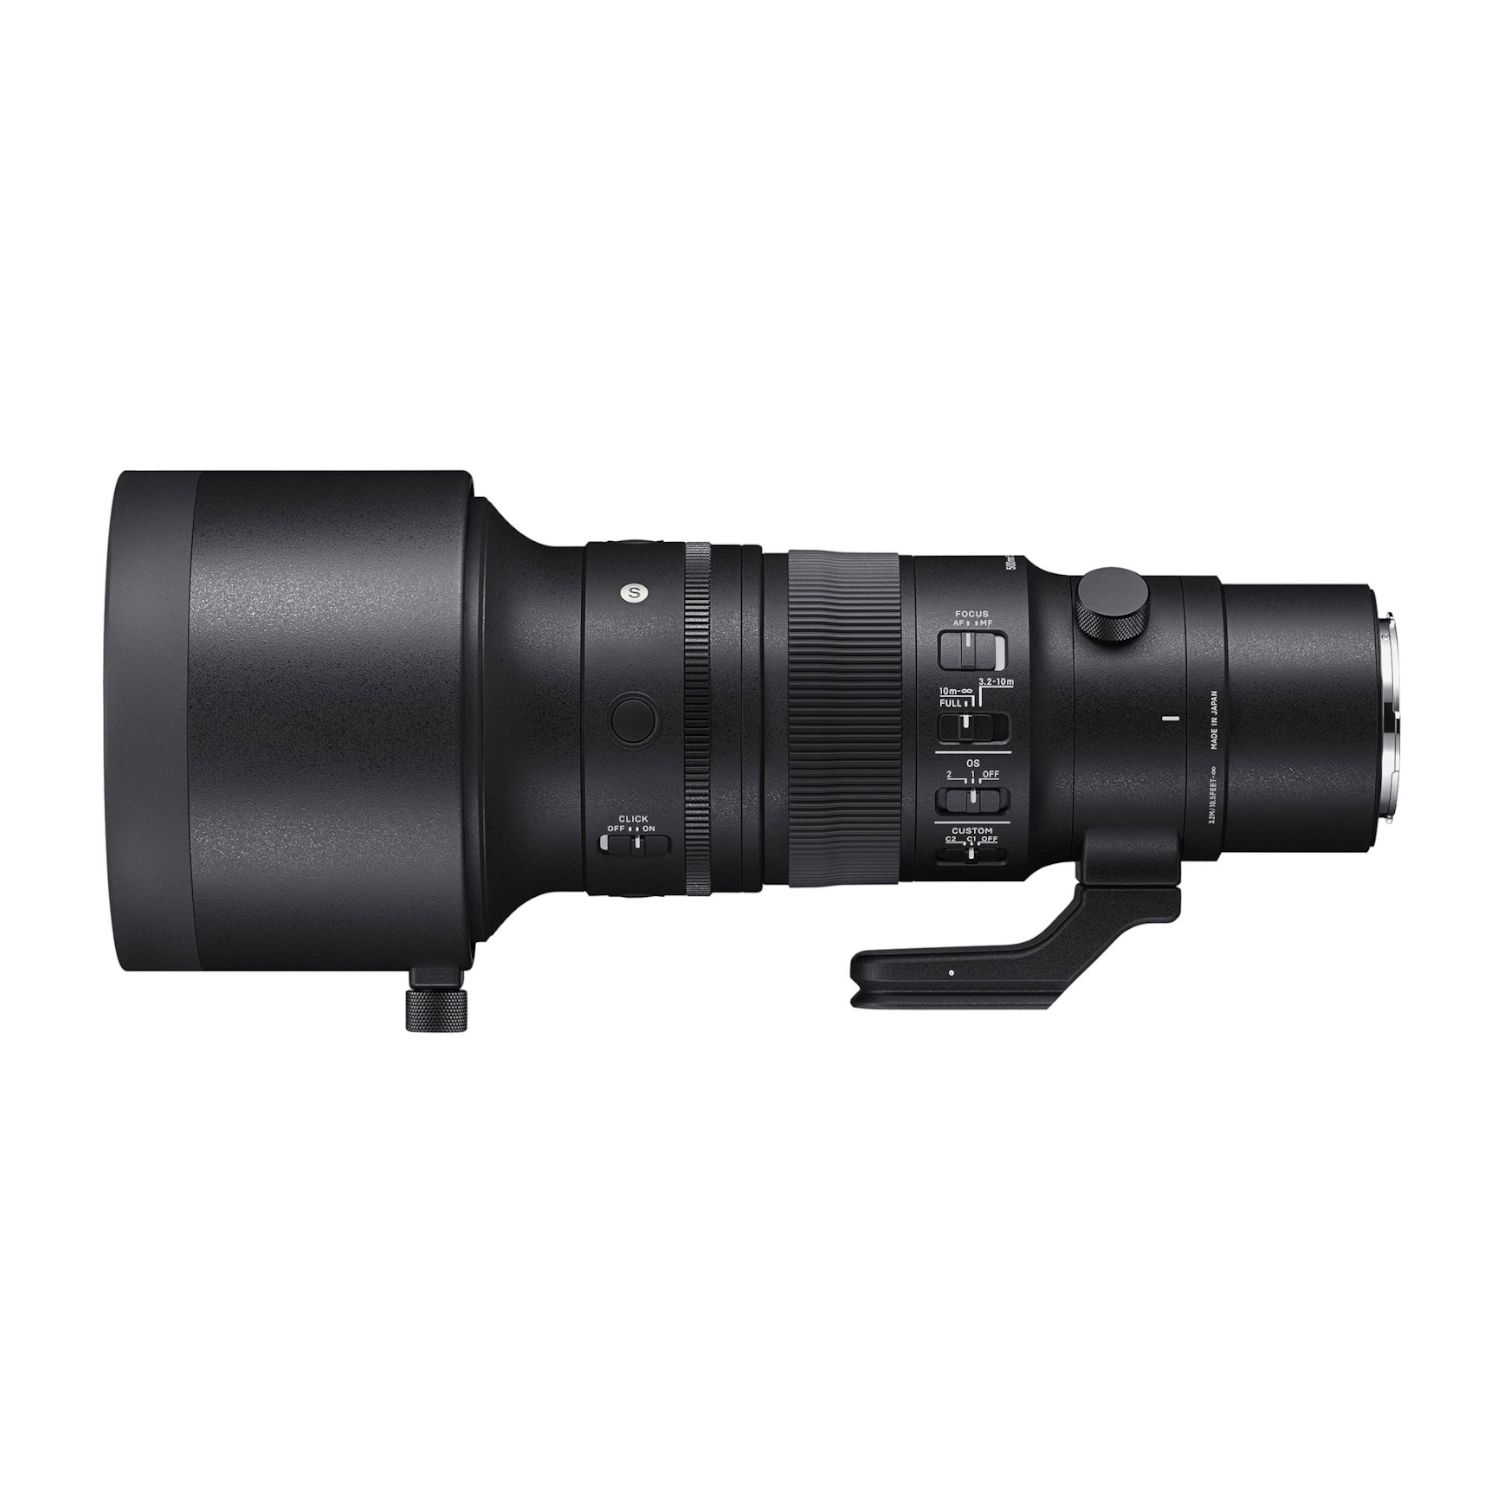 Sigma 500mm f/5.6 DG DN OS Sports Lens for Sony E-Mount